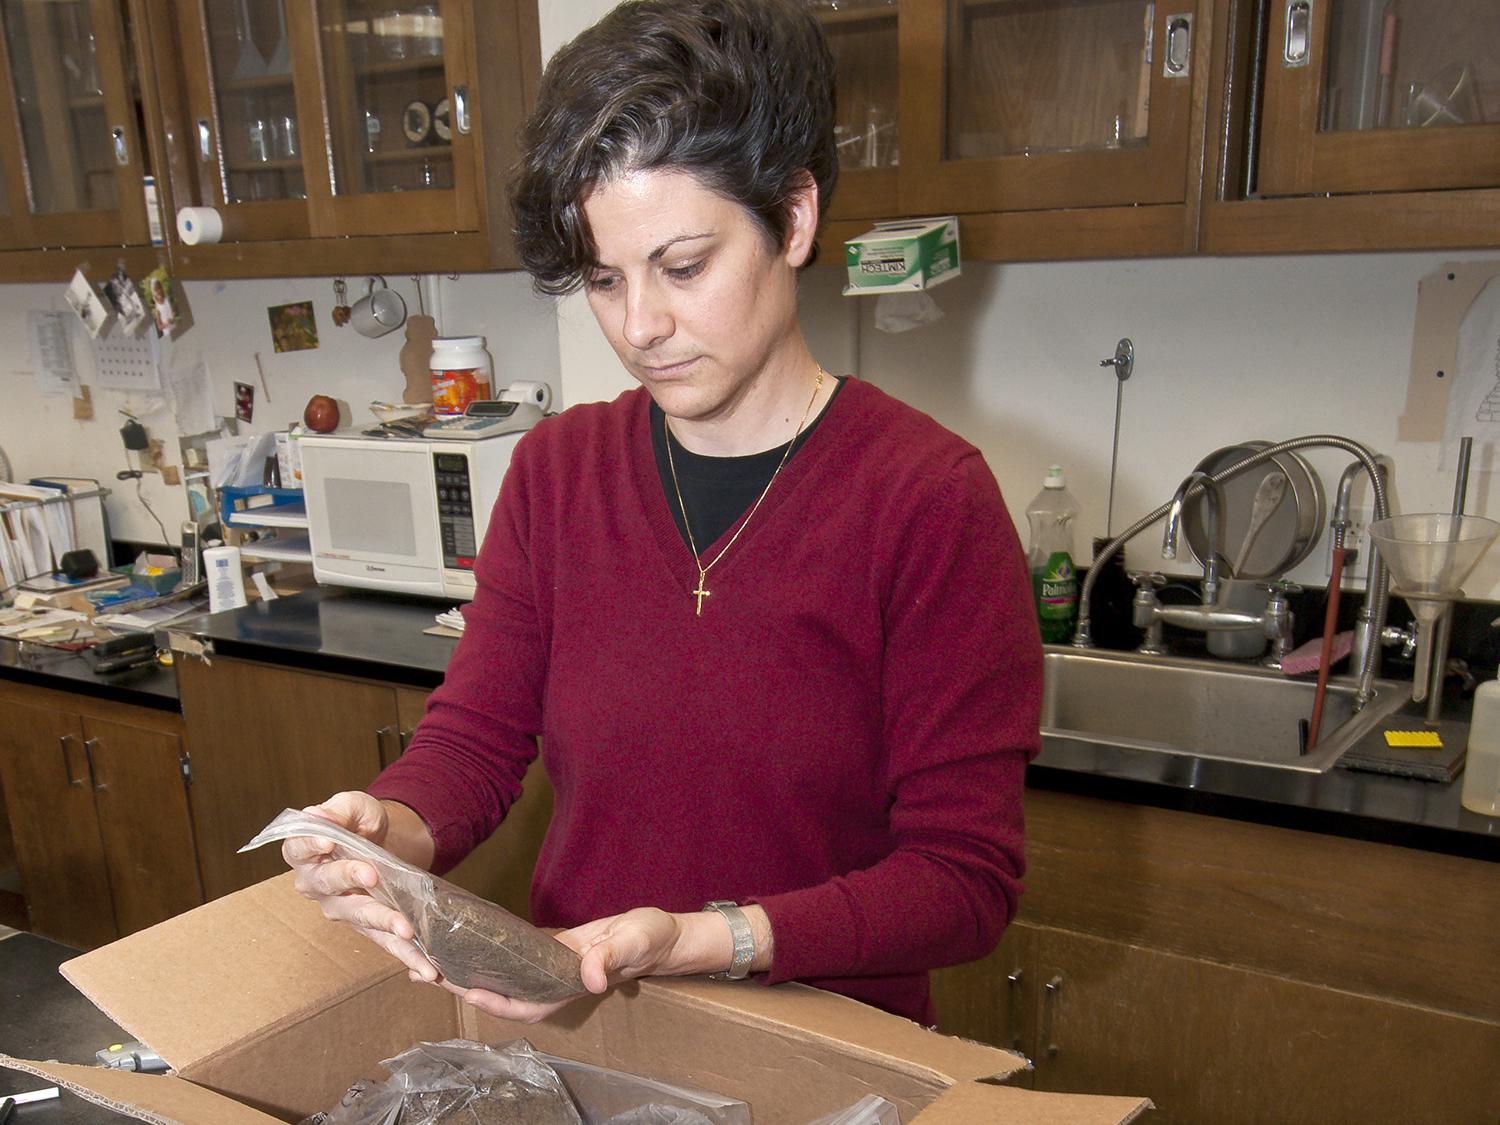 Clarissa Balbalian receives a box of nematode samples sent to the MSU Extension Service Plant Diagnostic Lab for evaluation. A proposed management strategy accompanies each set of test results. (Photo by MSU Ag Communications/Scott Corey)